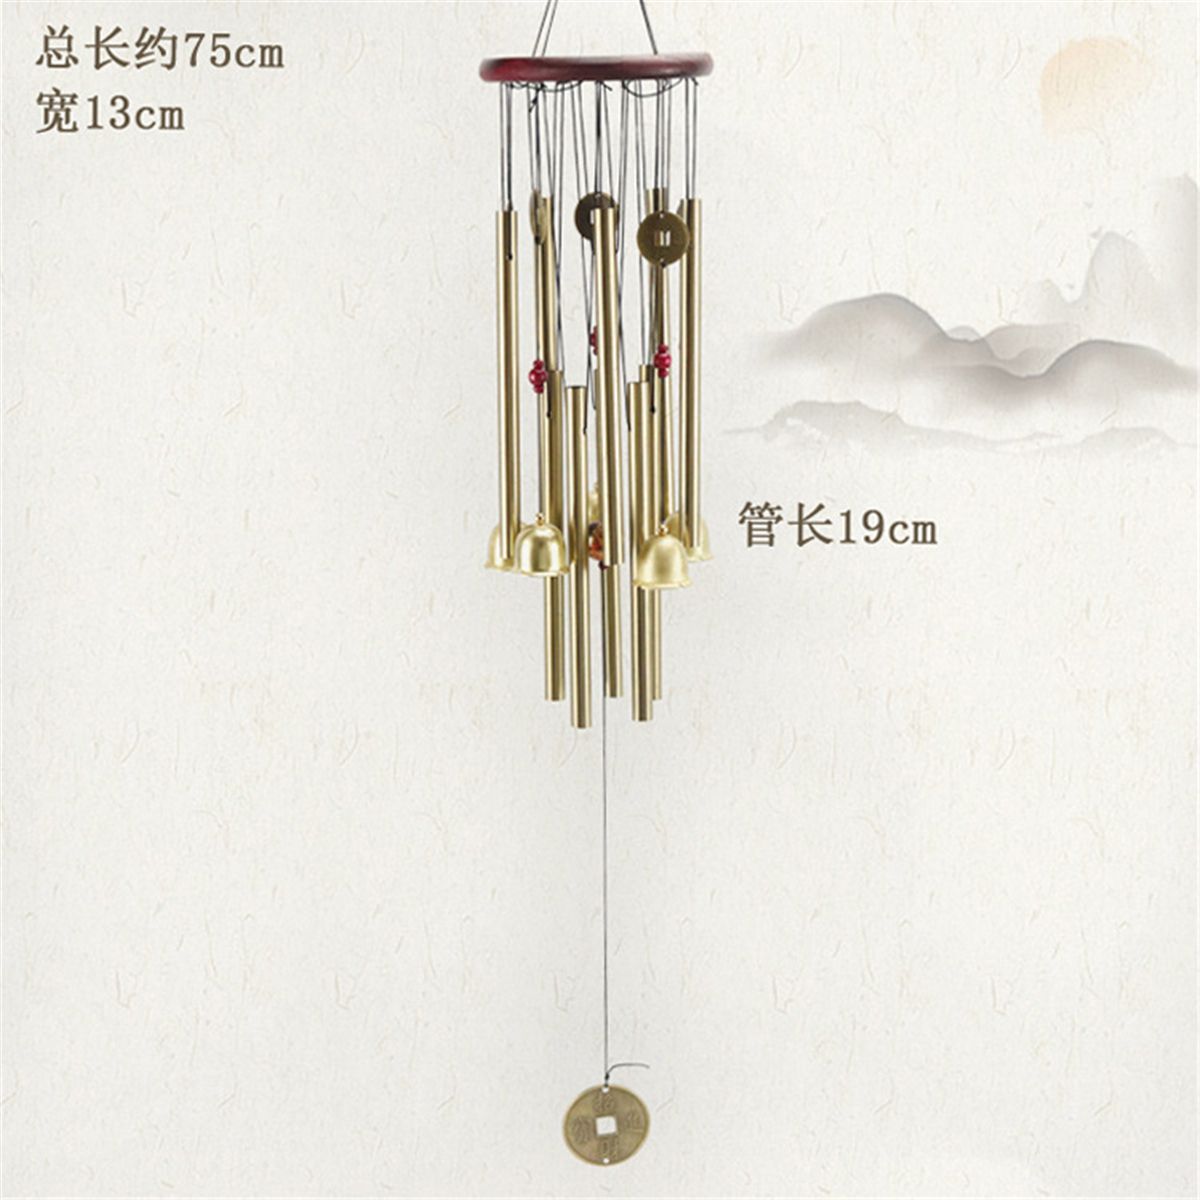 Wind-Chimes-Large-Tone-Resonant-Bell-10-Tubes-Chapel-Church-Garden-Decor-33quot-1694339